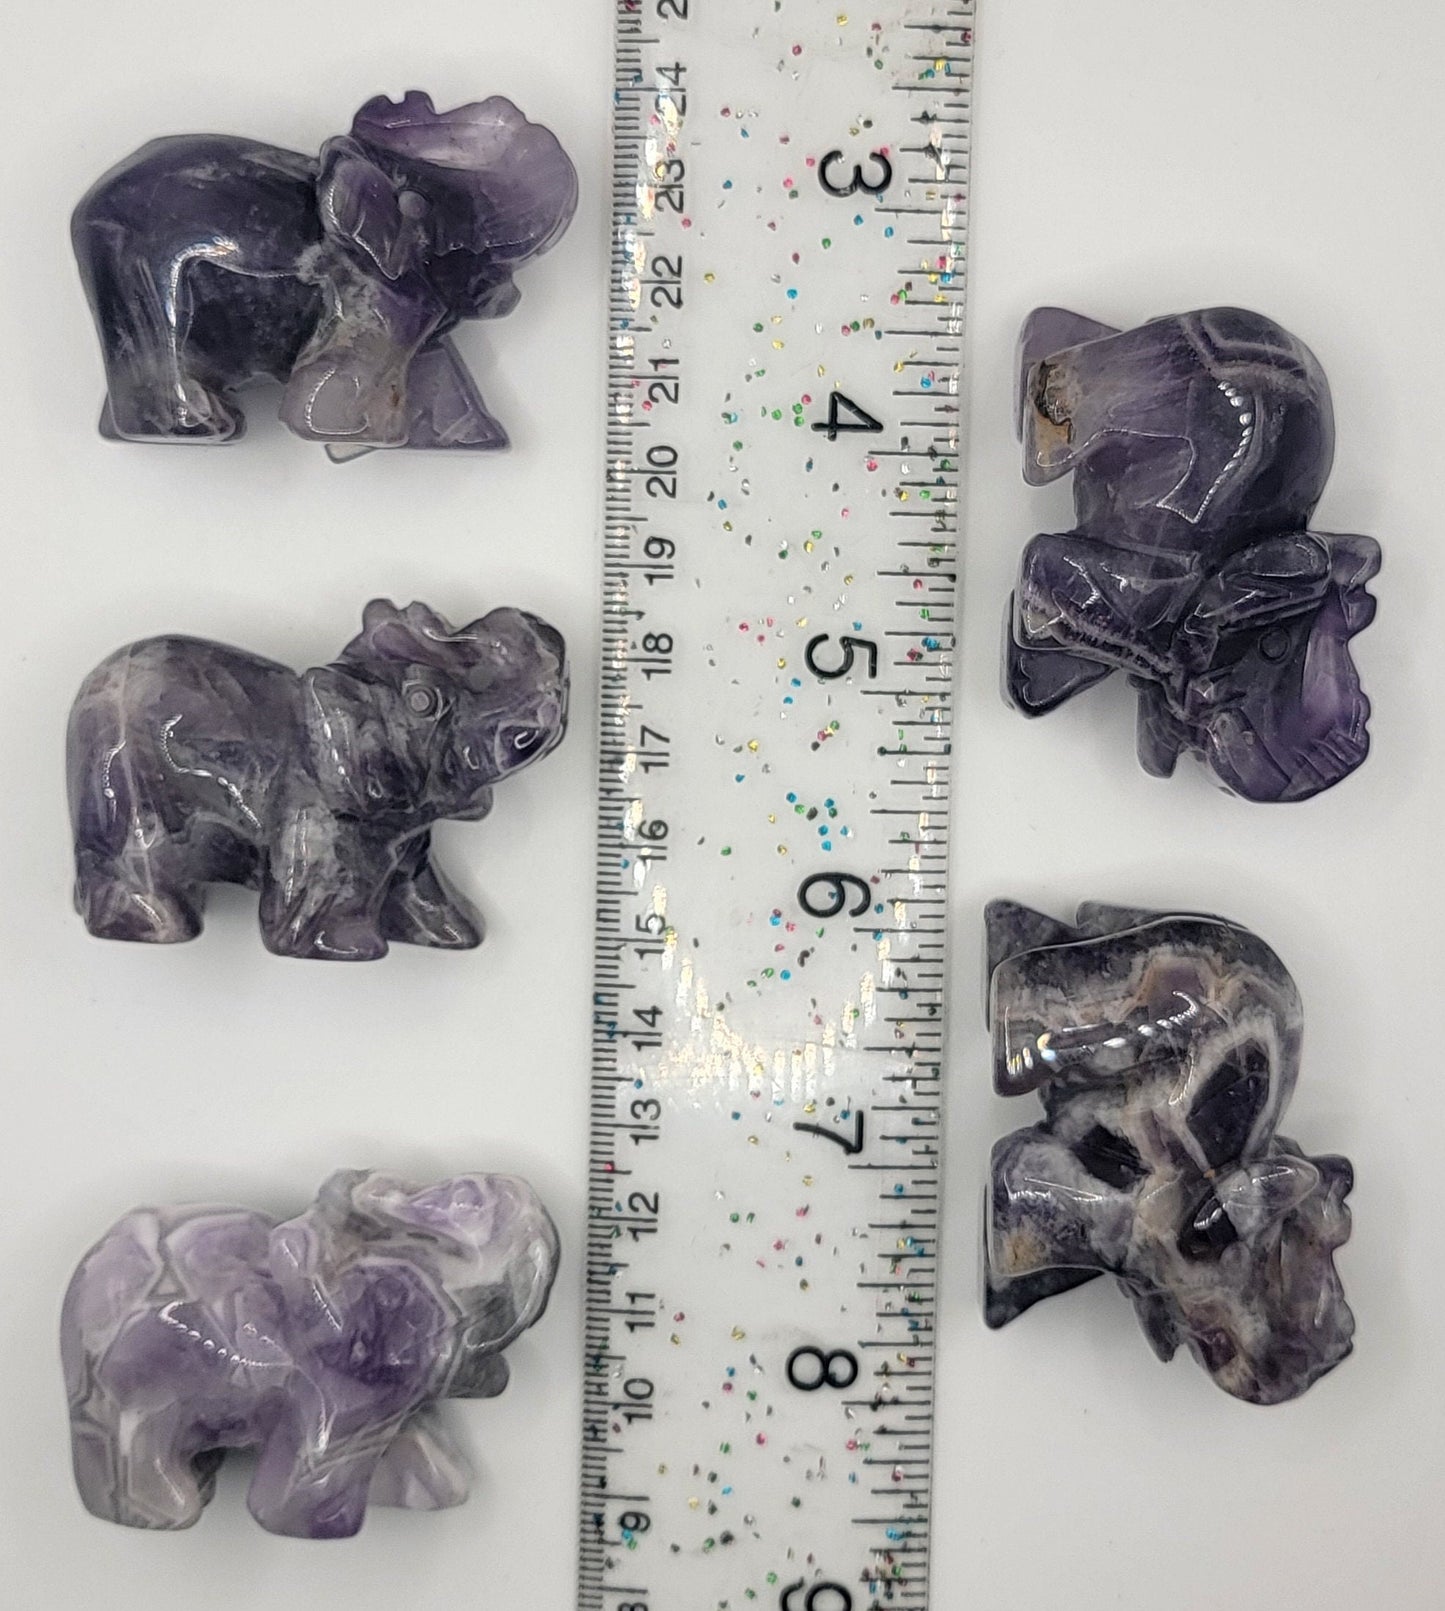 amethyst elephant carved figurines, showcasing intricately detailed craftsmanship and rich purple tones, displayed next to a ruler to show size. Amethyst elephants are approximately 2” x 1 1/2”.